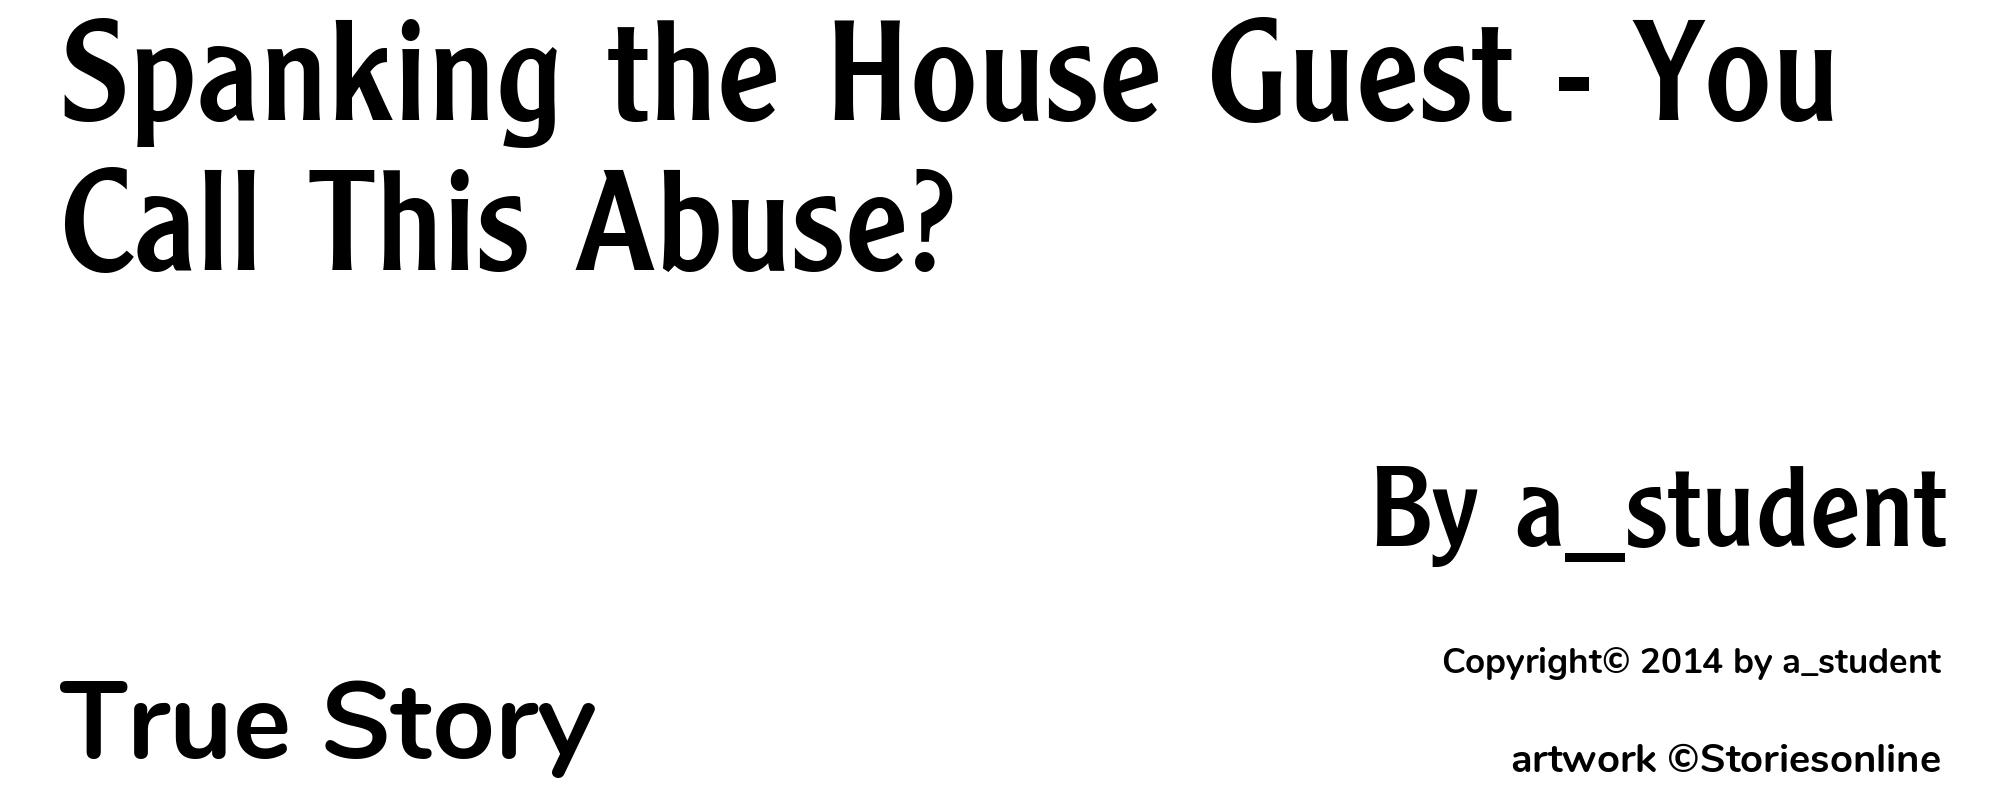 Spanking the House Guest - You Call This Abuse? - Cover